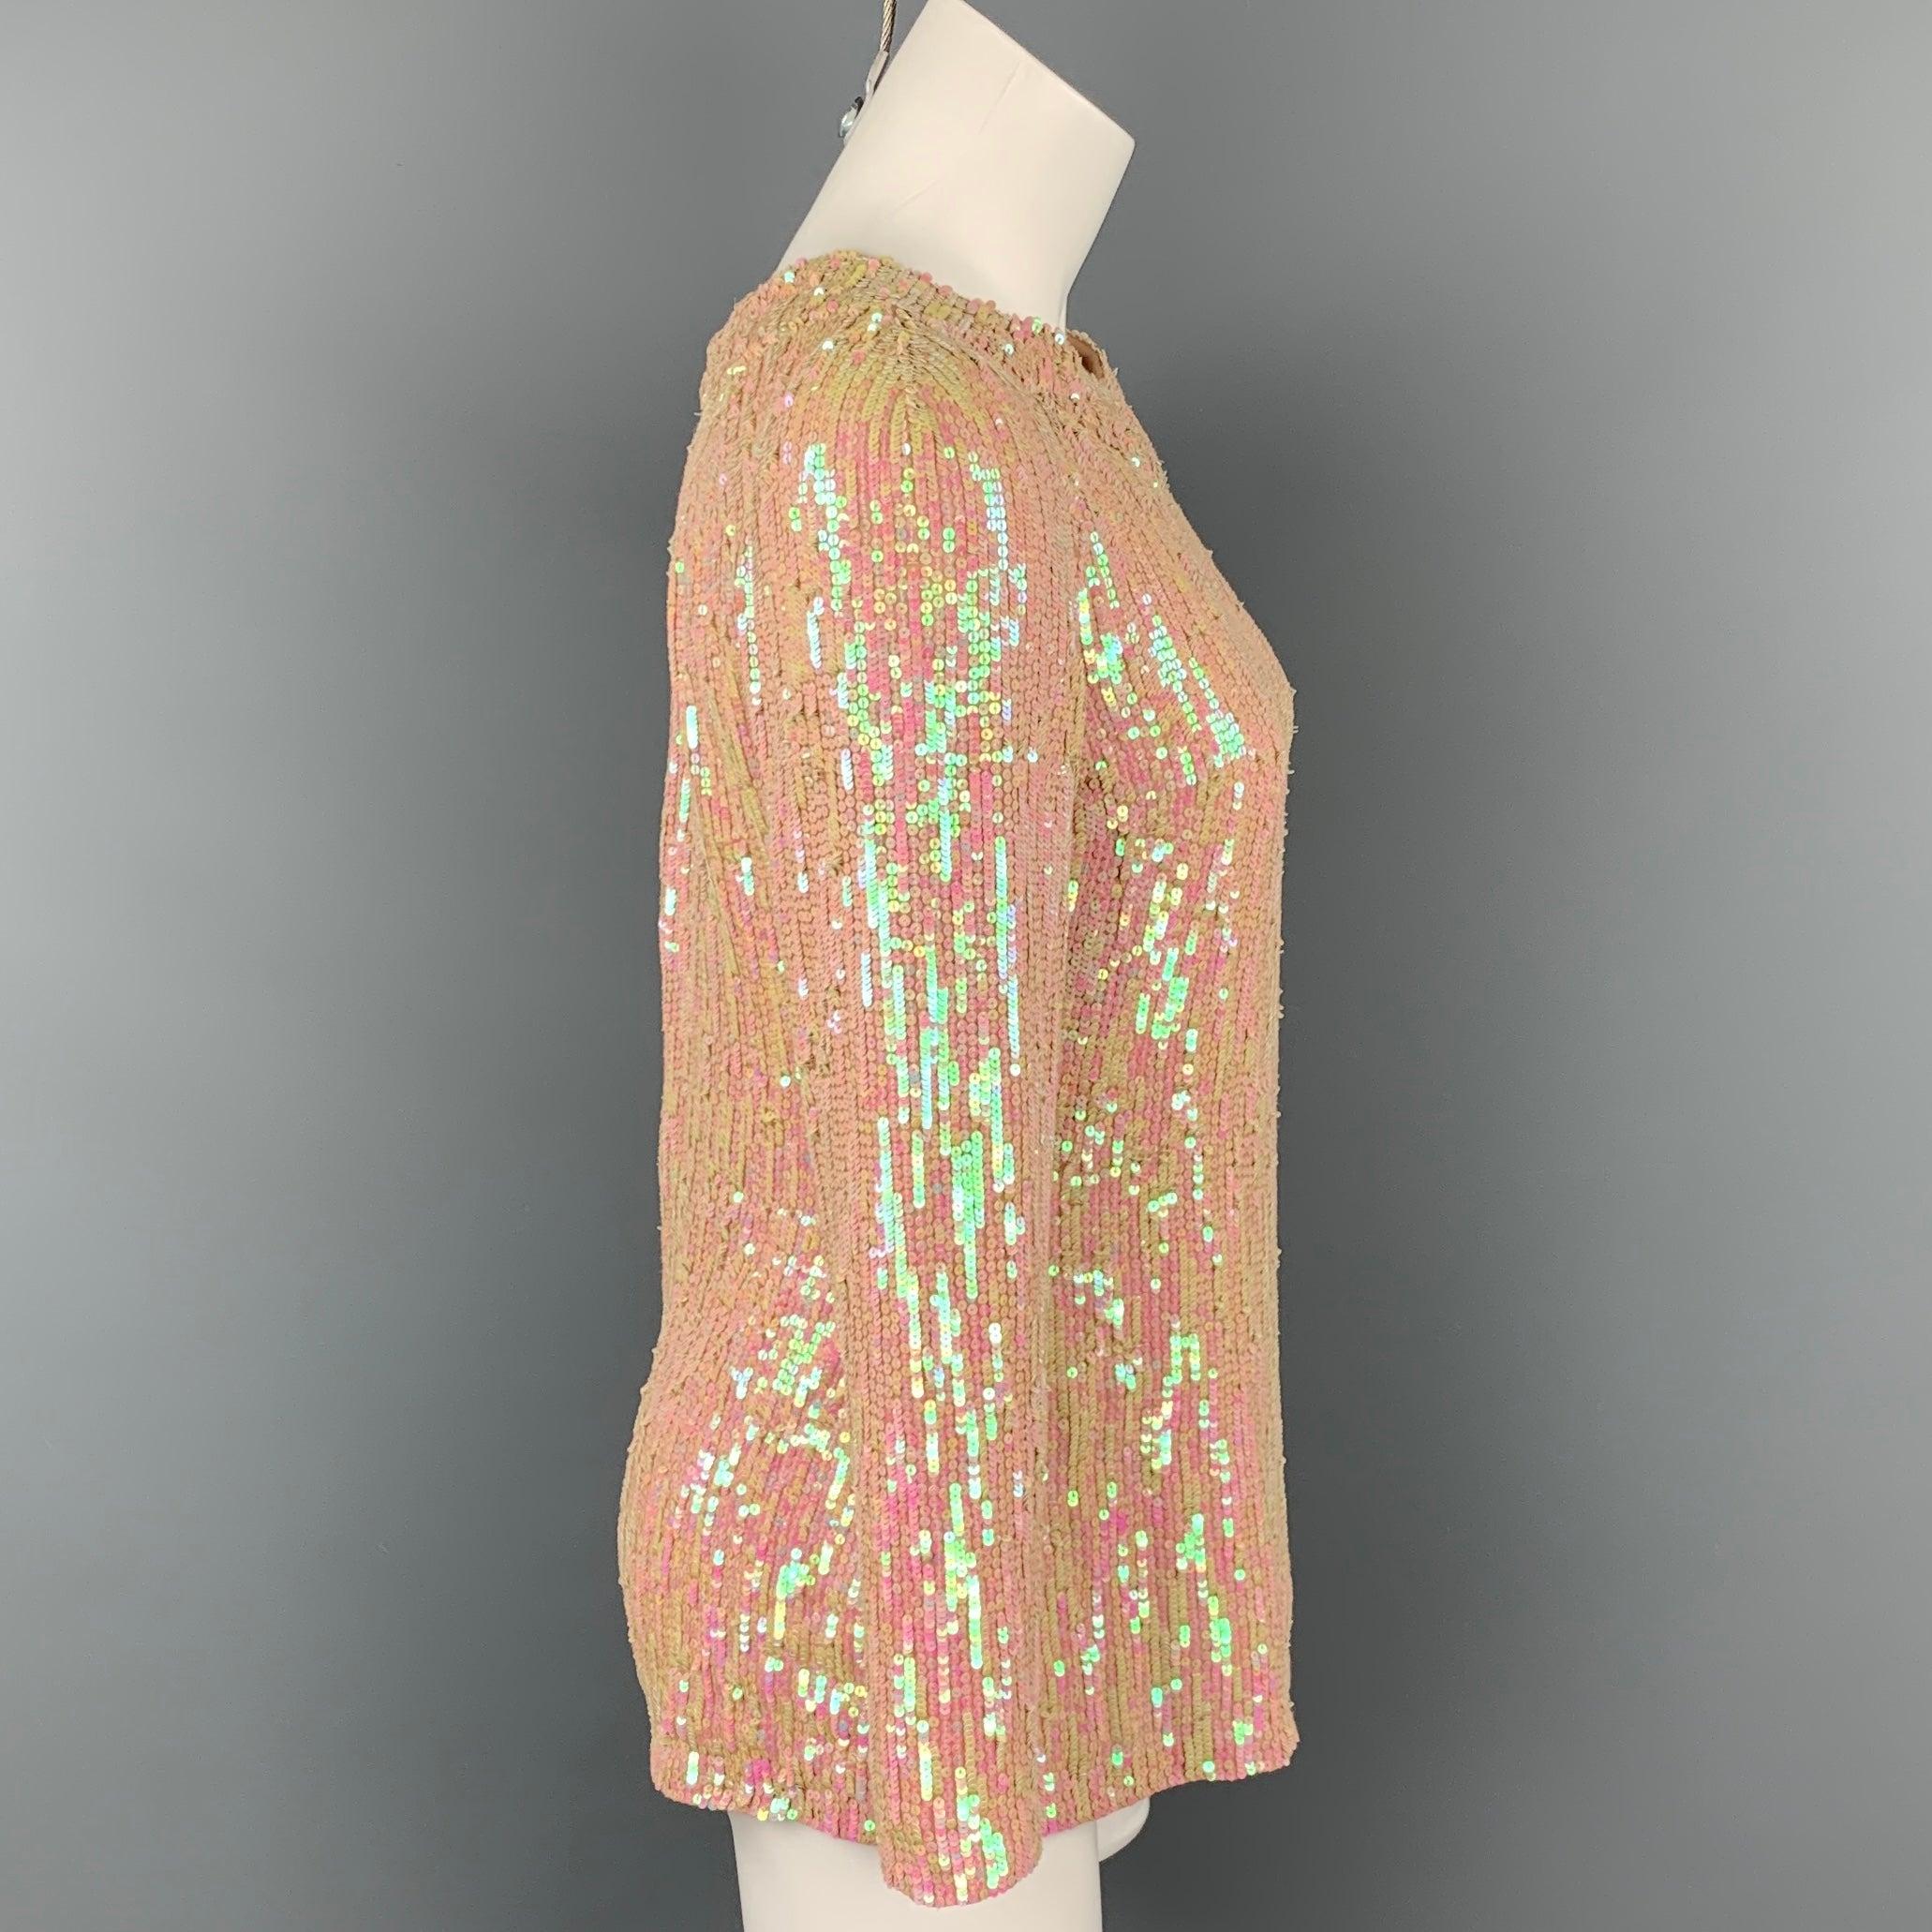 DRIES VAN NOTEN dress top comes in a iridescent & nude sequin silk featuring long sleeves and a back hook & loop closure.Very Good
Pre-Owned Condition. 

Marked:   38 

Measurements: 
 
Shoulder: 17.5 inches  Bust: 36 inches  Sleeve: 21 inches 